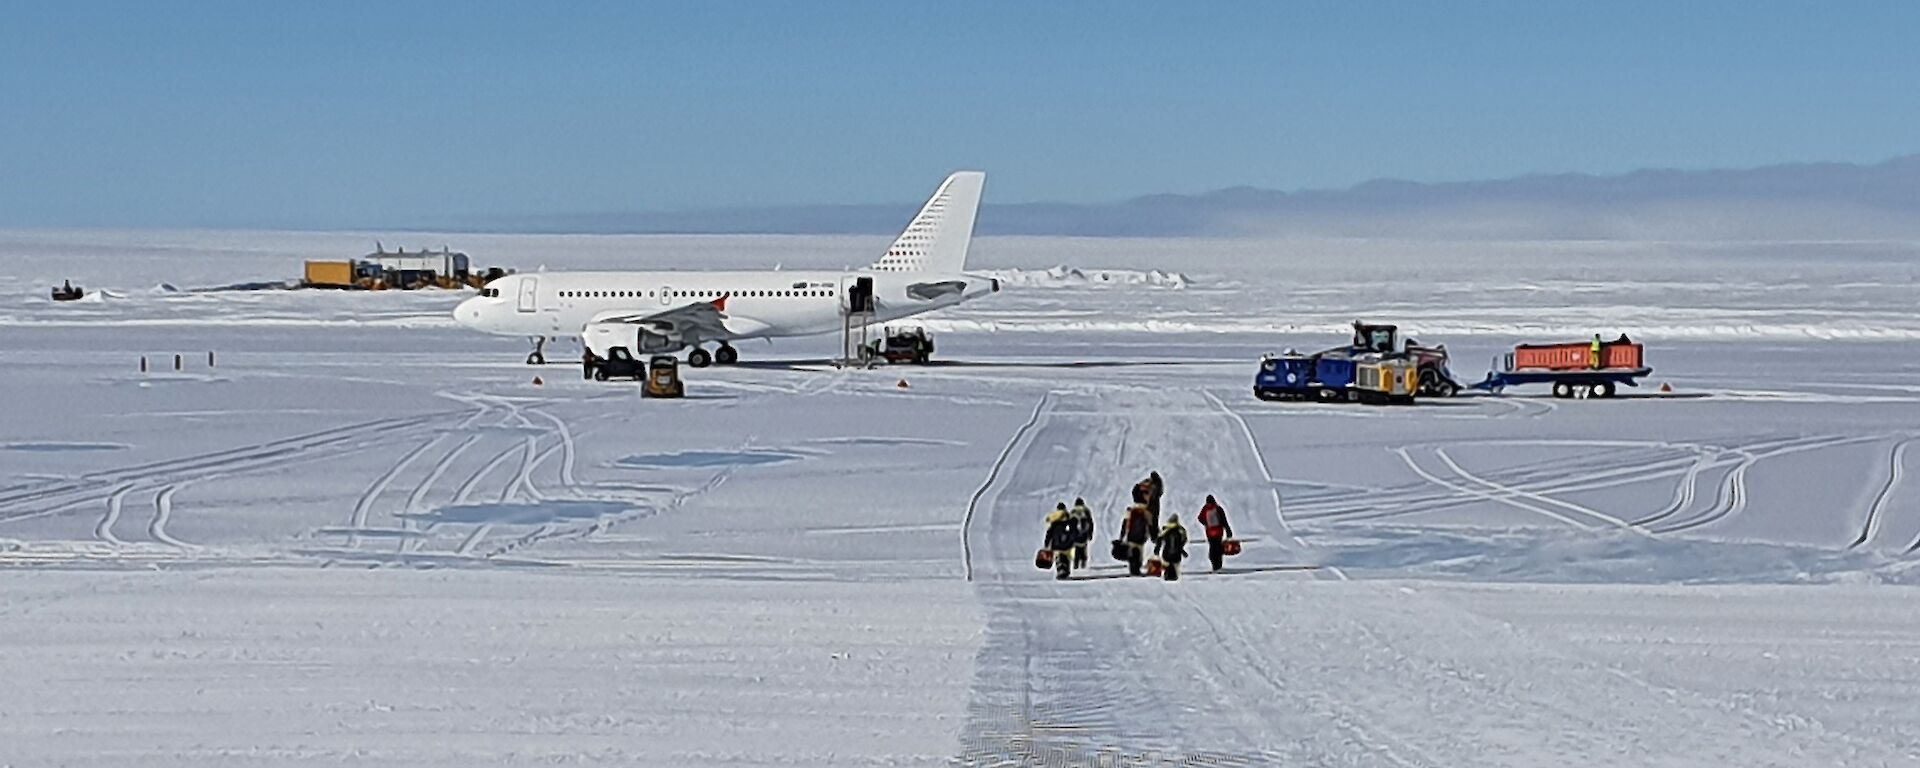 An ice runway with a plane parked at the end and expeditioners with bags walking towards camera